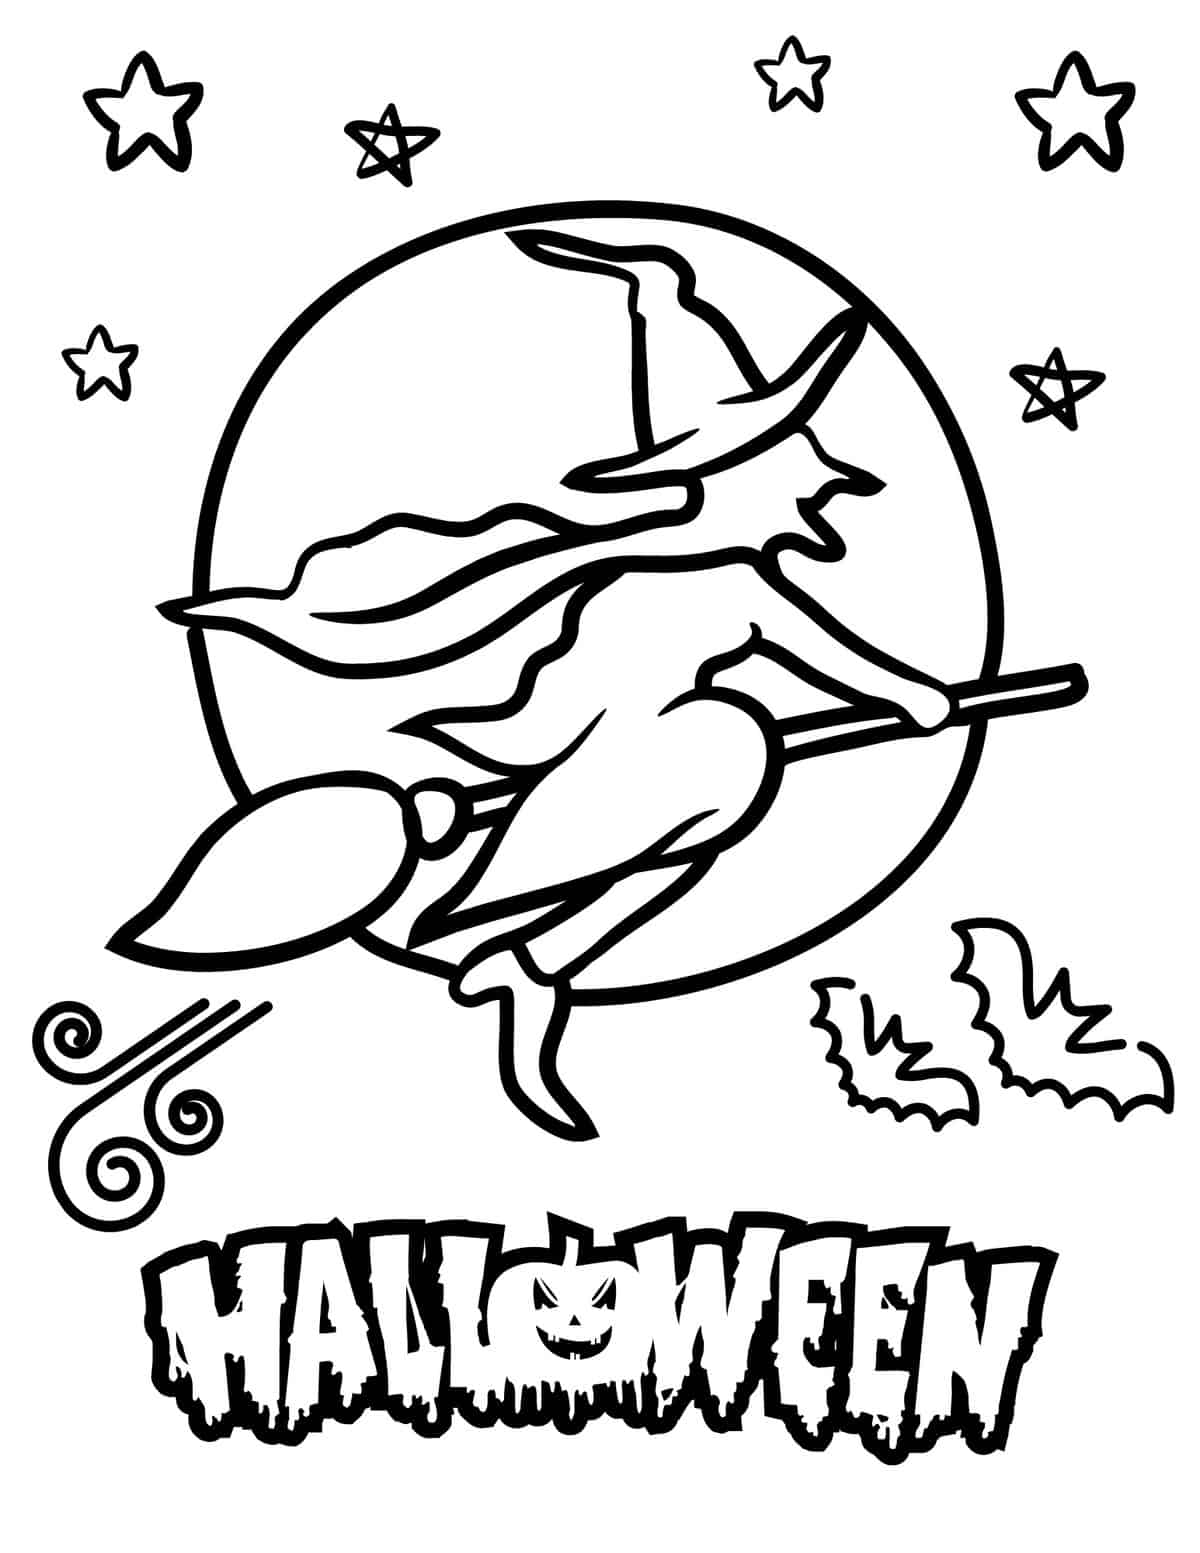 Free halloween coloring pages for kids and adults